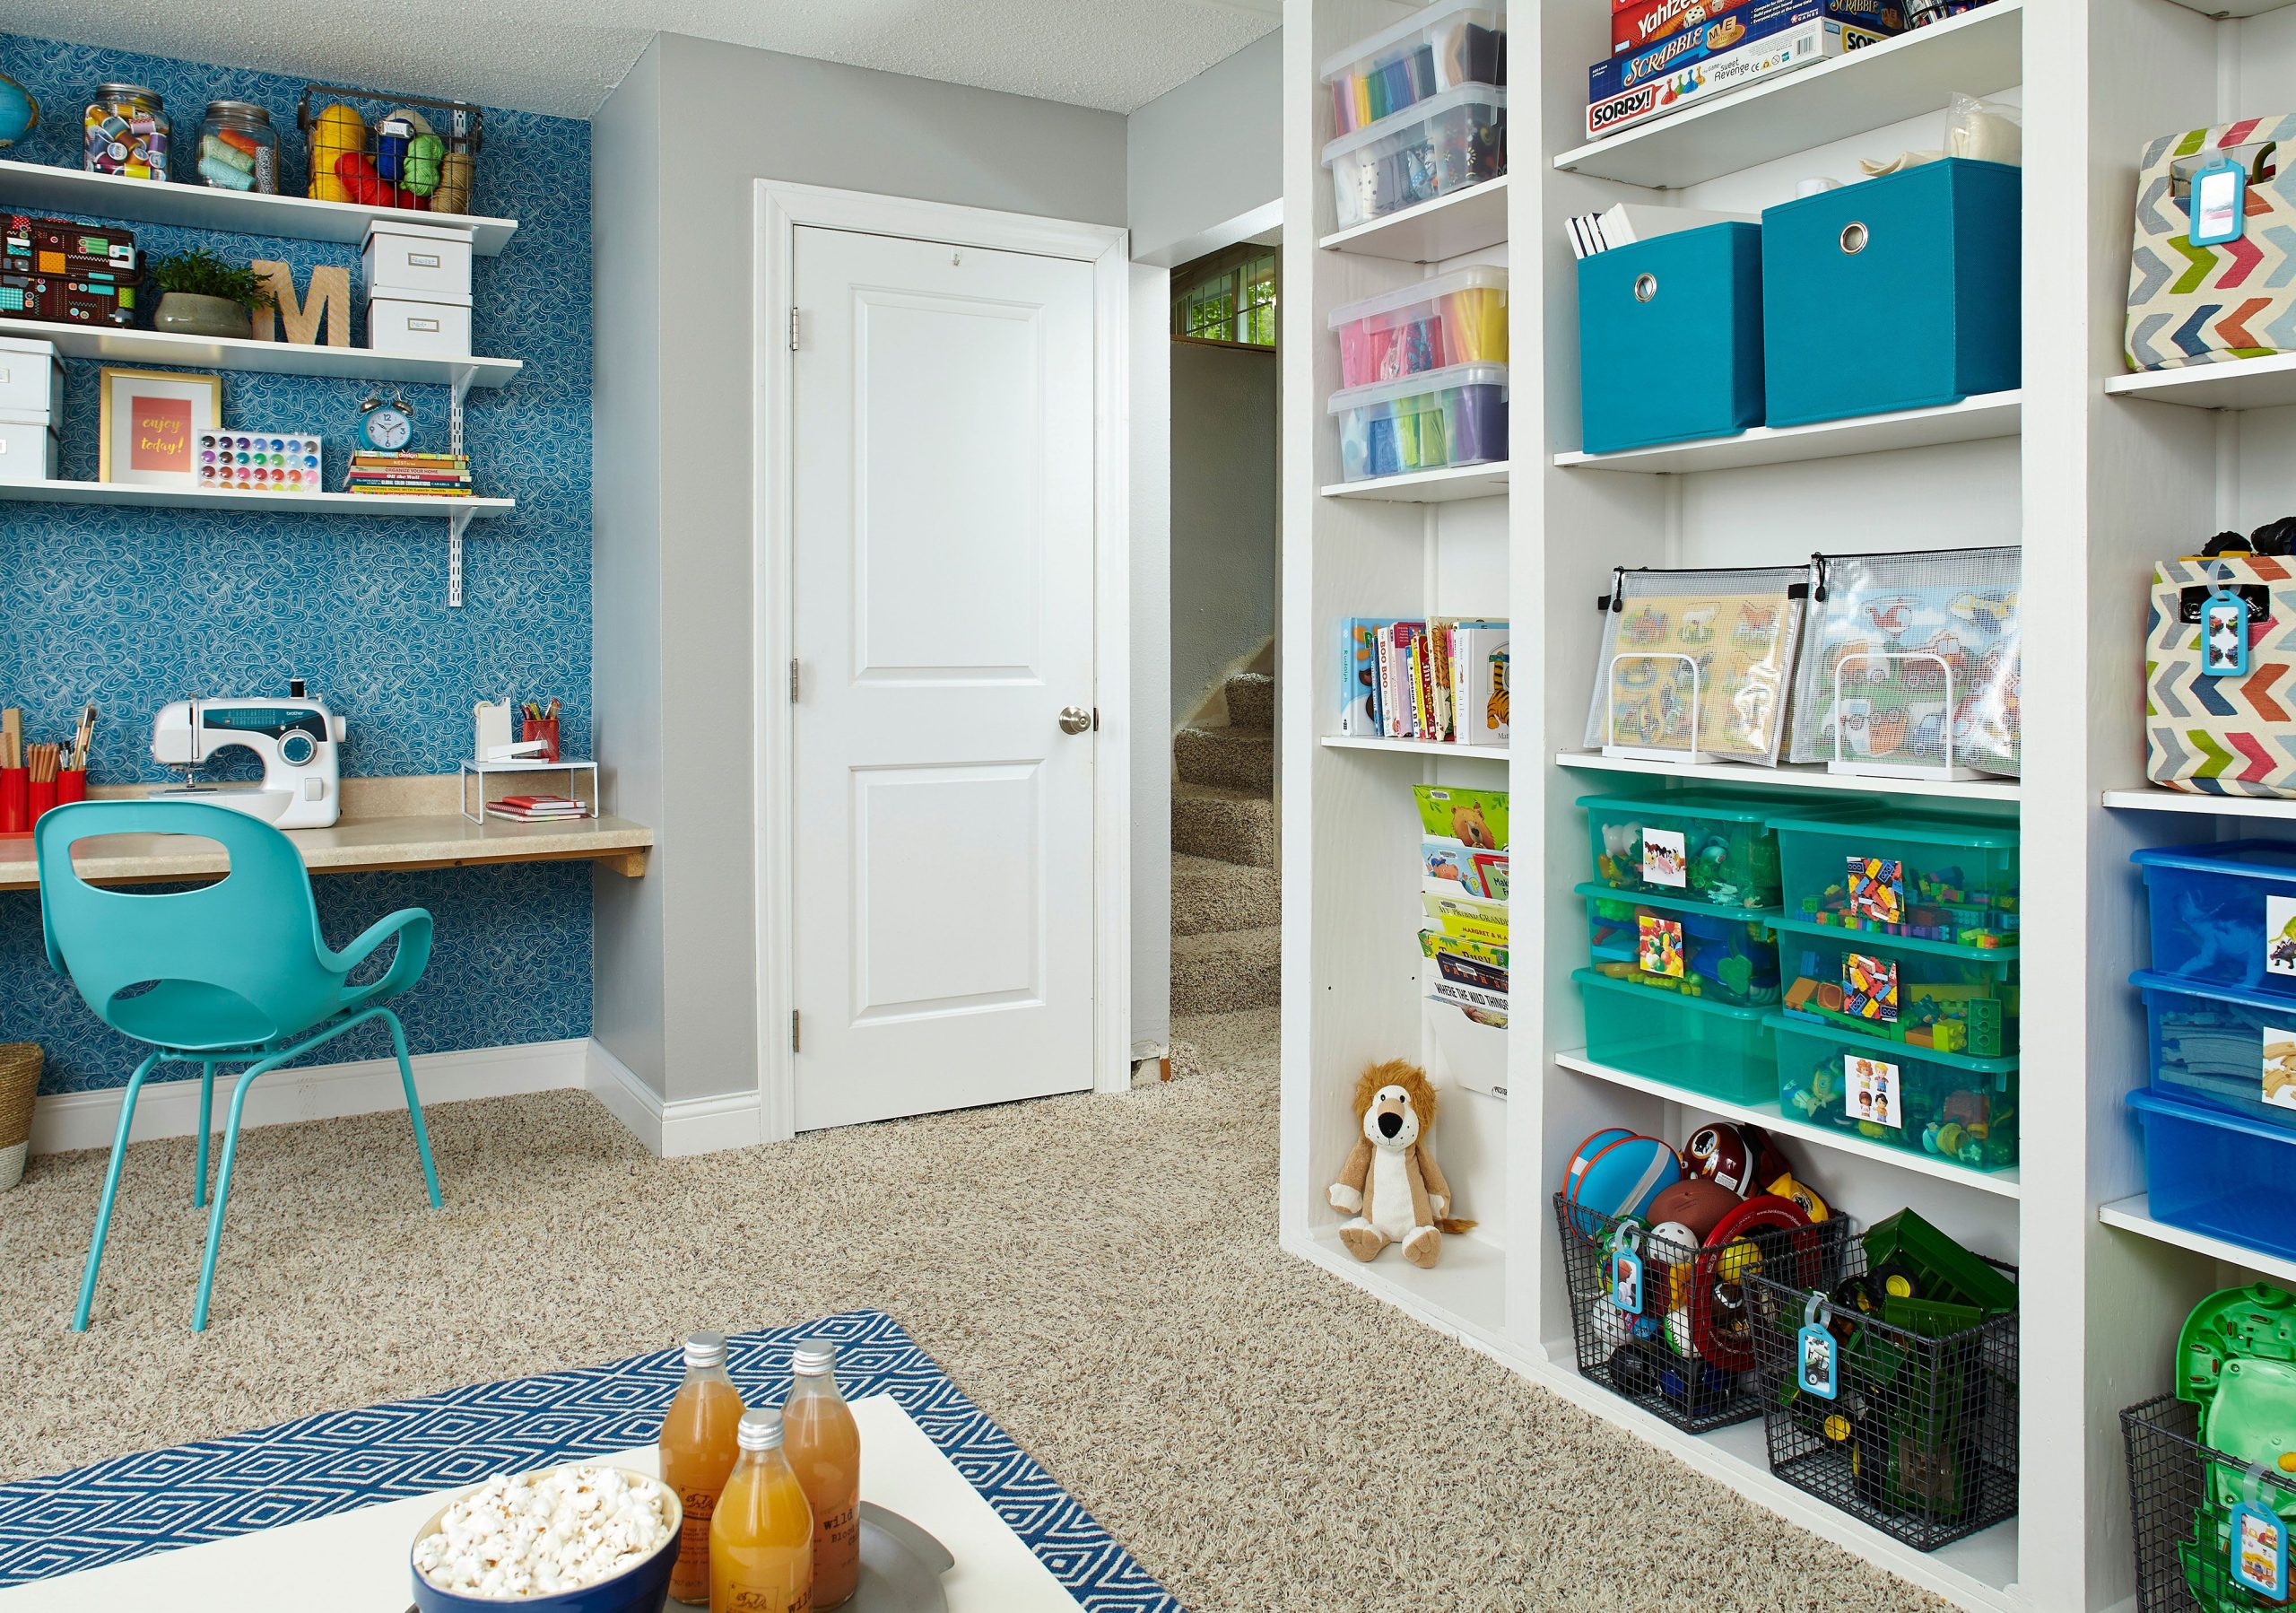 Creating a Clutter-Free Space in a Child's Room